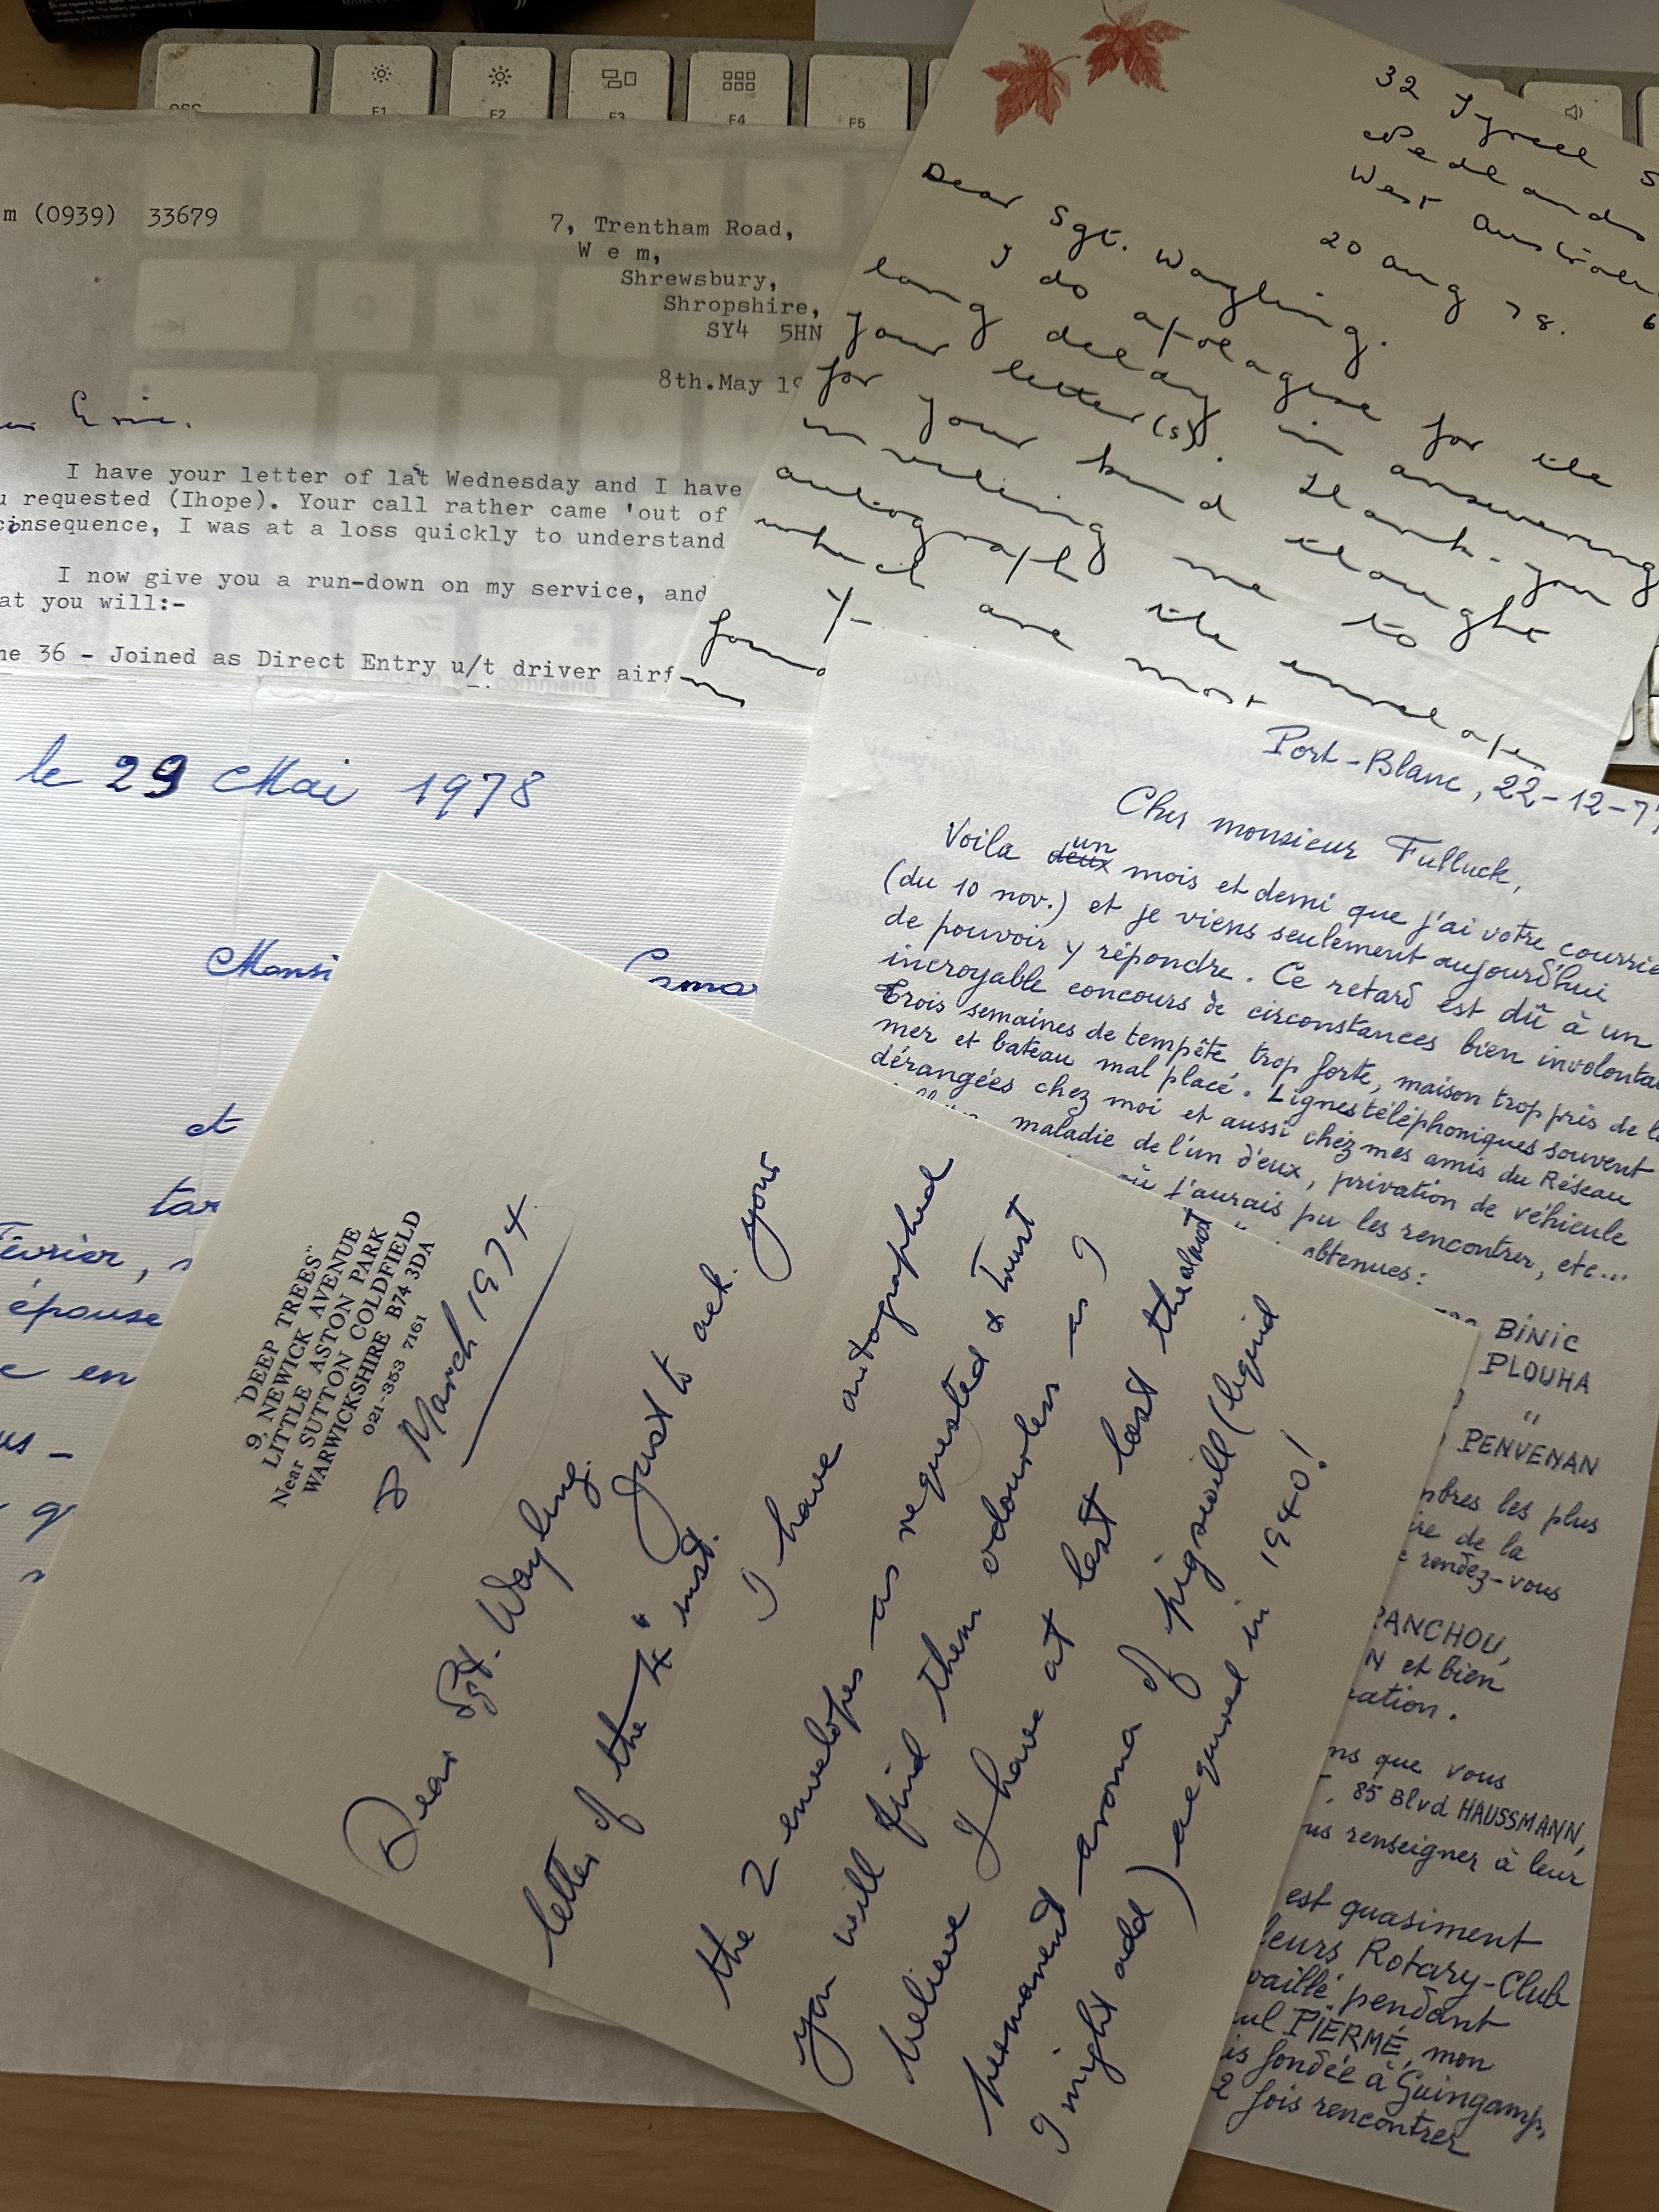 WW2 collection of FIVE letters, mostly handwritten, some typed ALL signed by a veteran of the Second